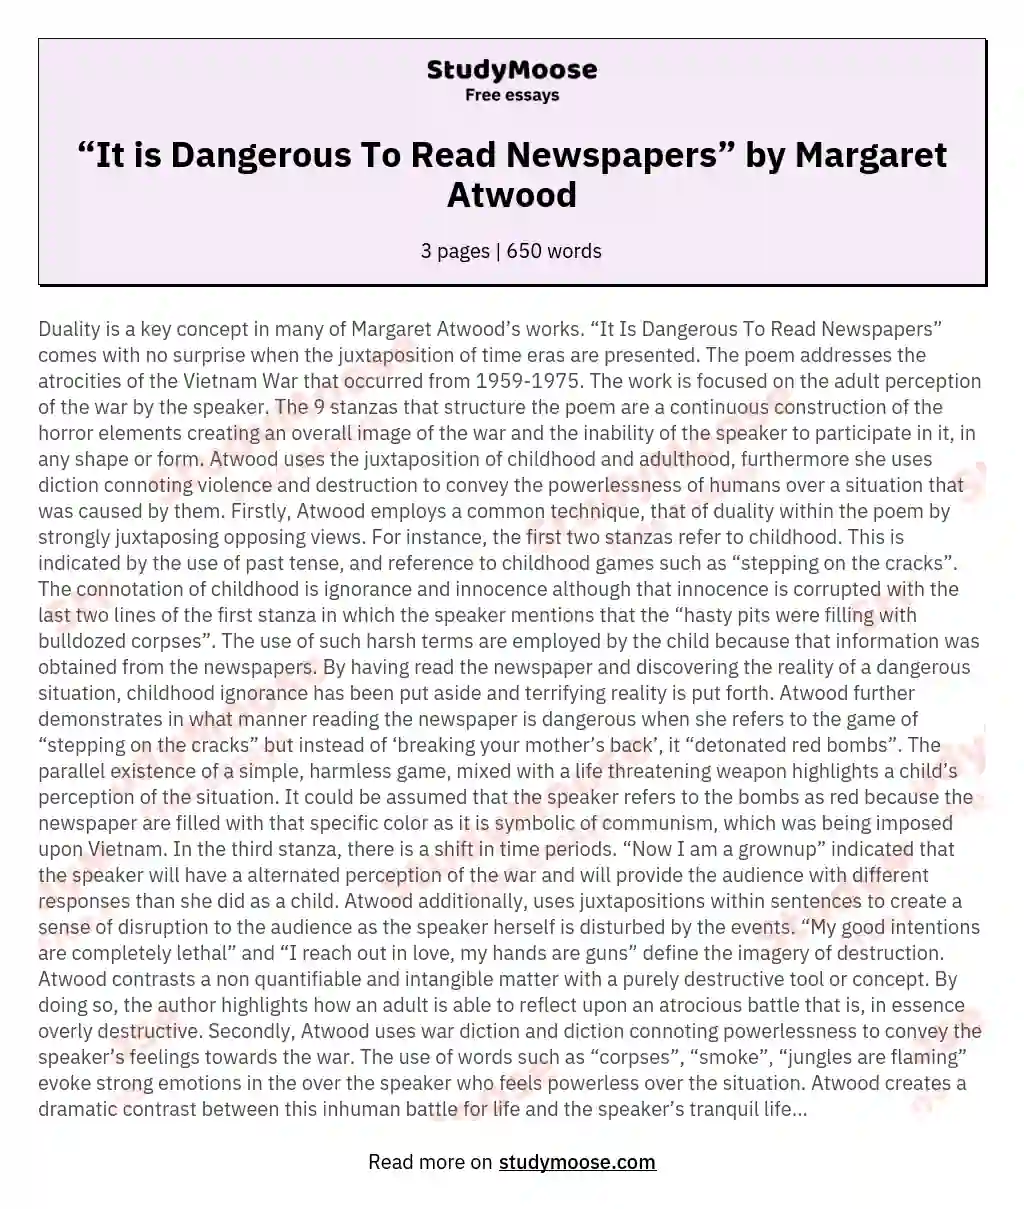 “It is Dangerous To Read Newspapers” by Margaret Atwood essay